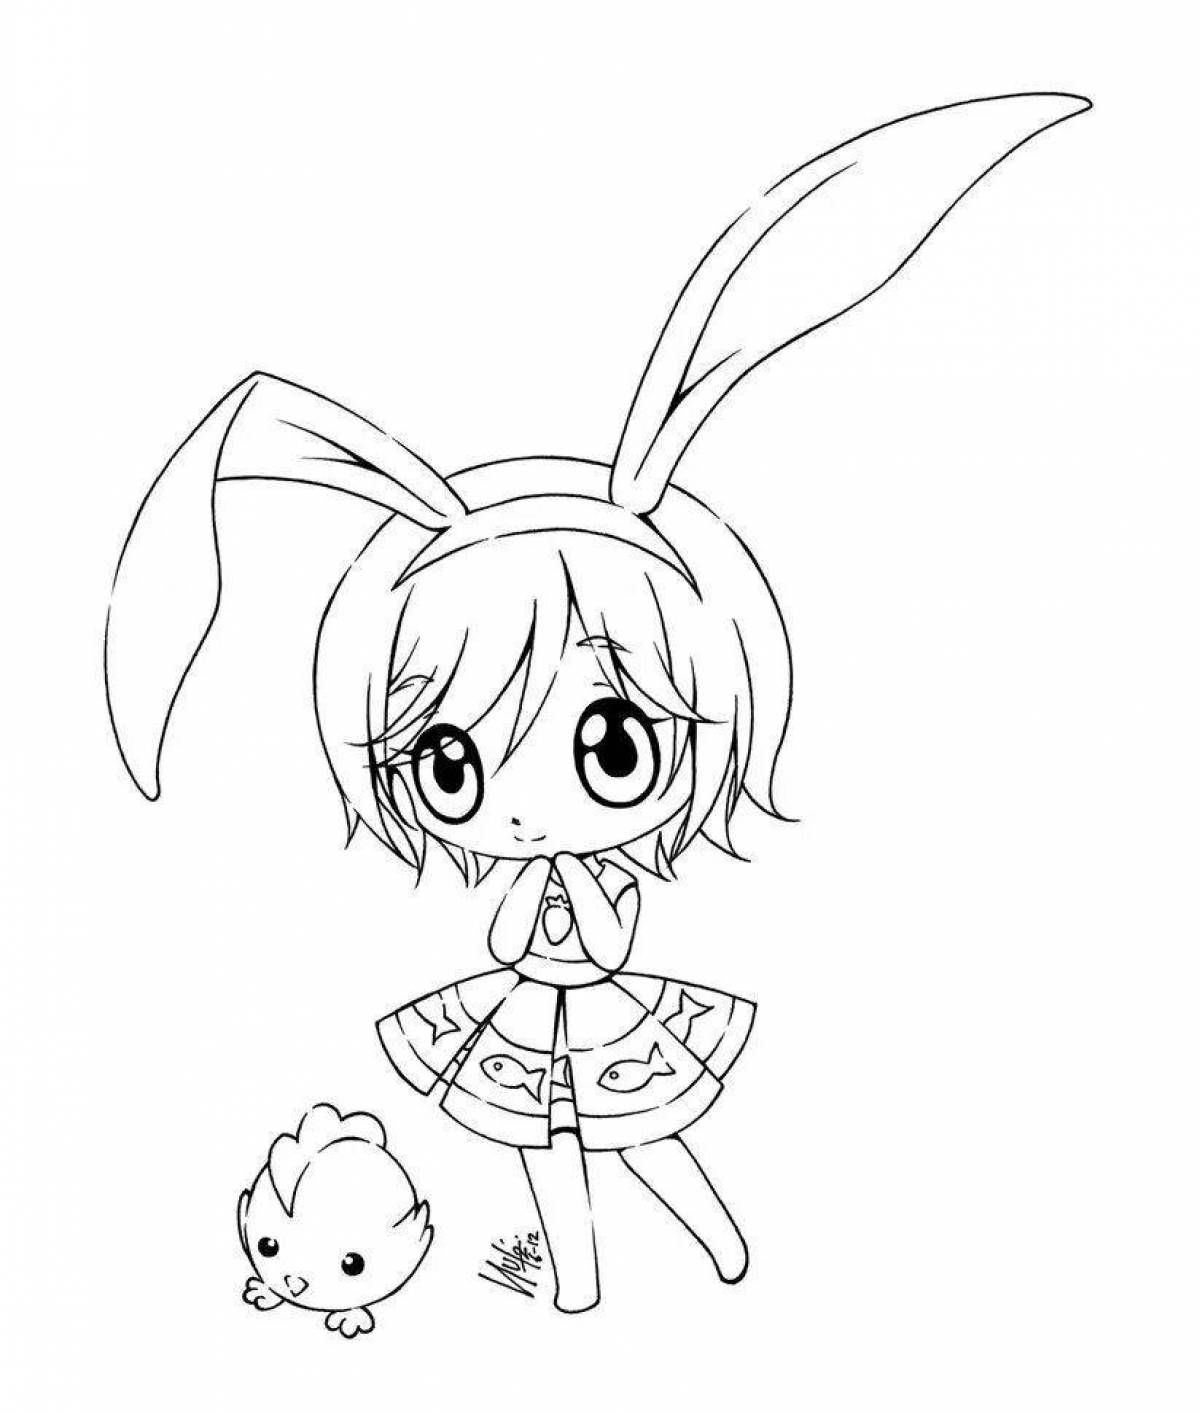 Funny anime bunny coloring book